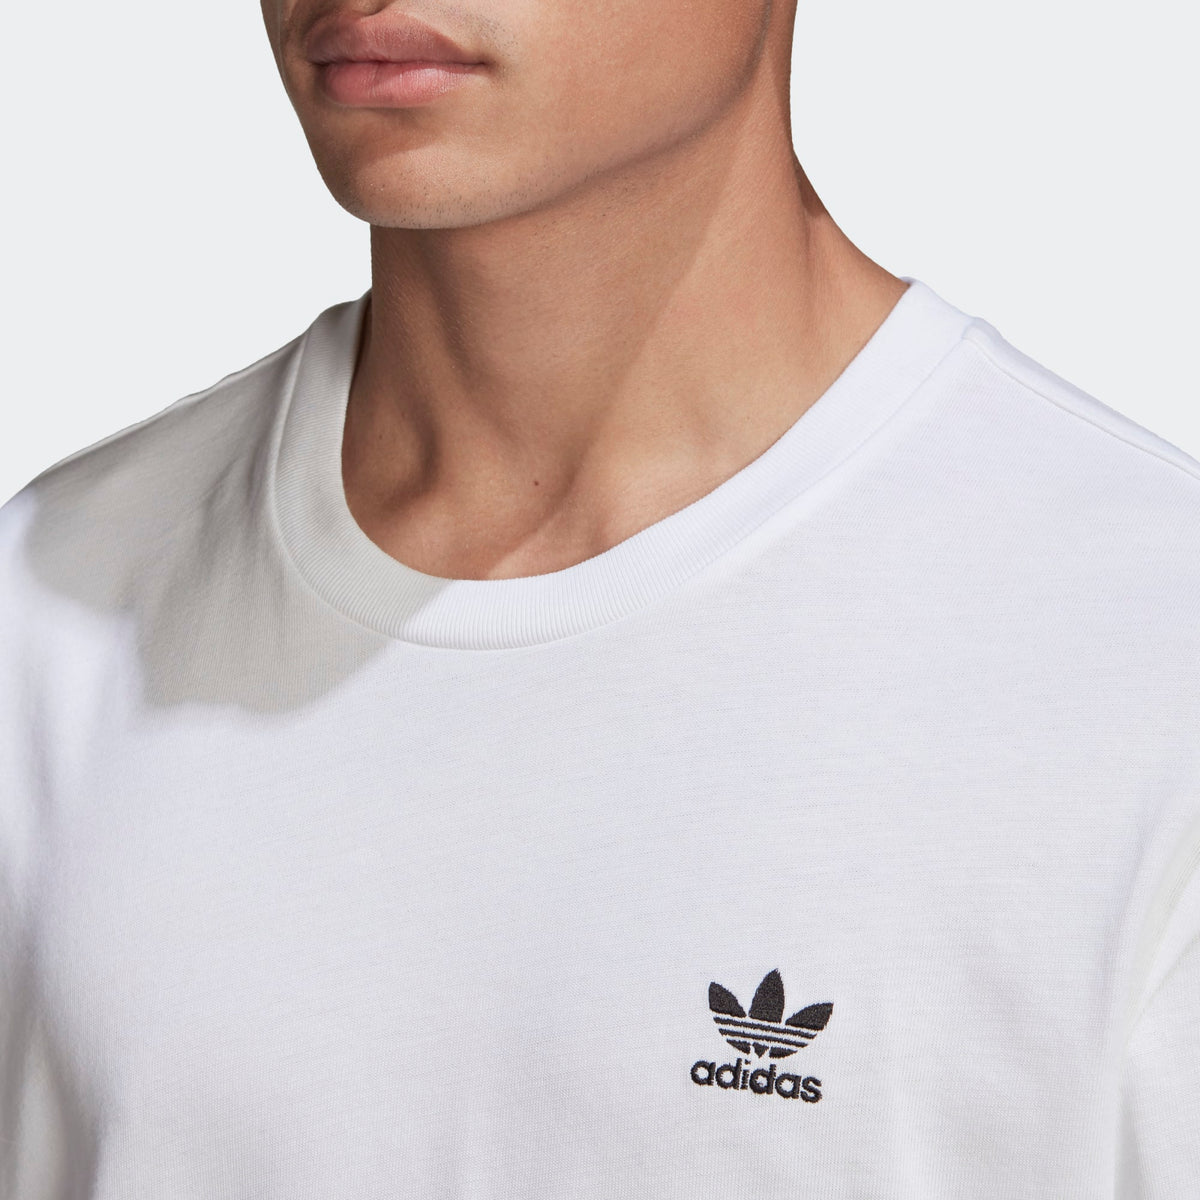 Merch Adidas Boxy Classics Adicolor Trilogy (White)(GN3453) Embroidered – Logo PH Tee